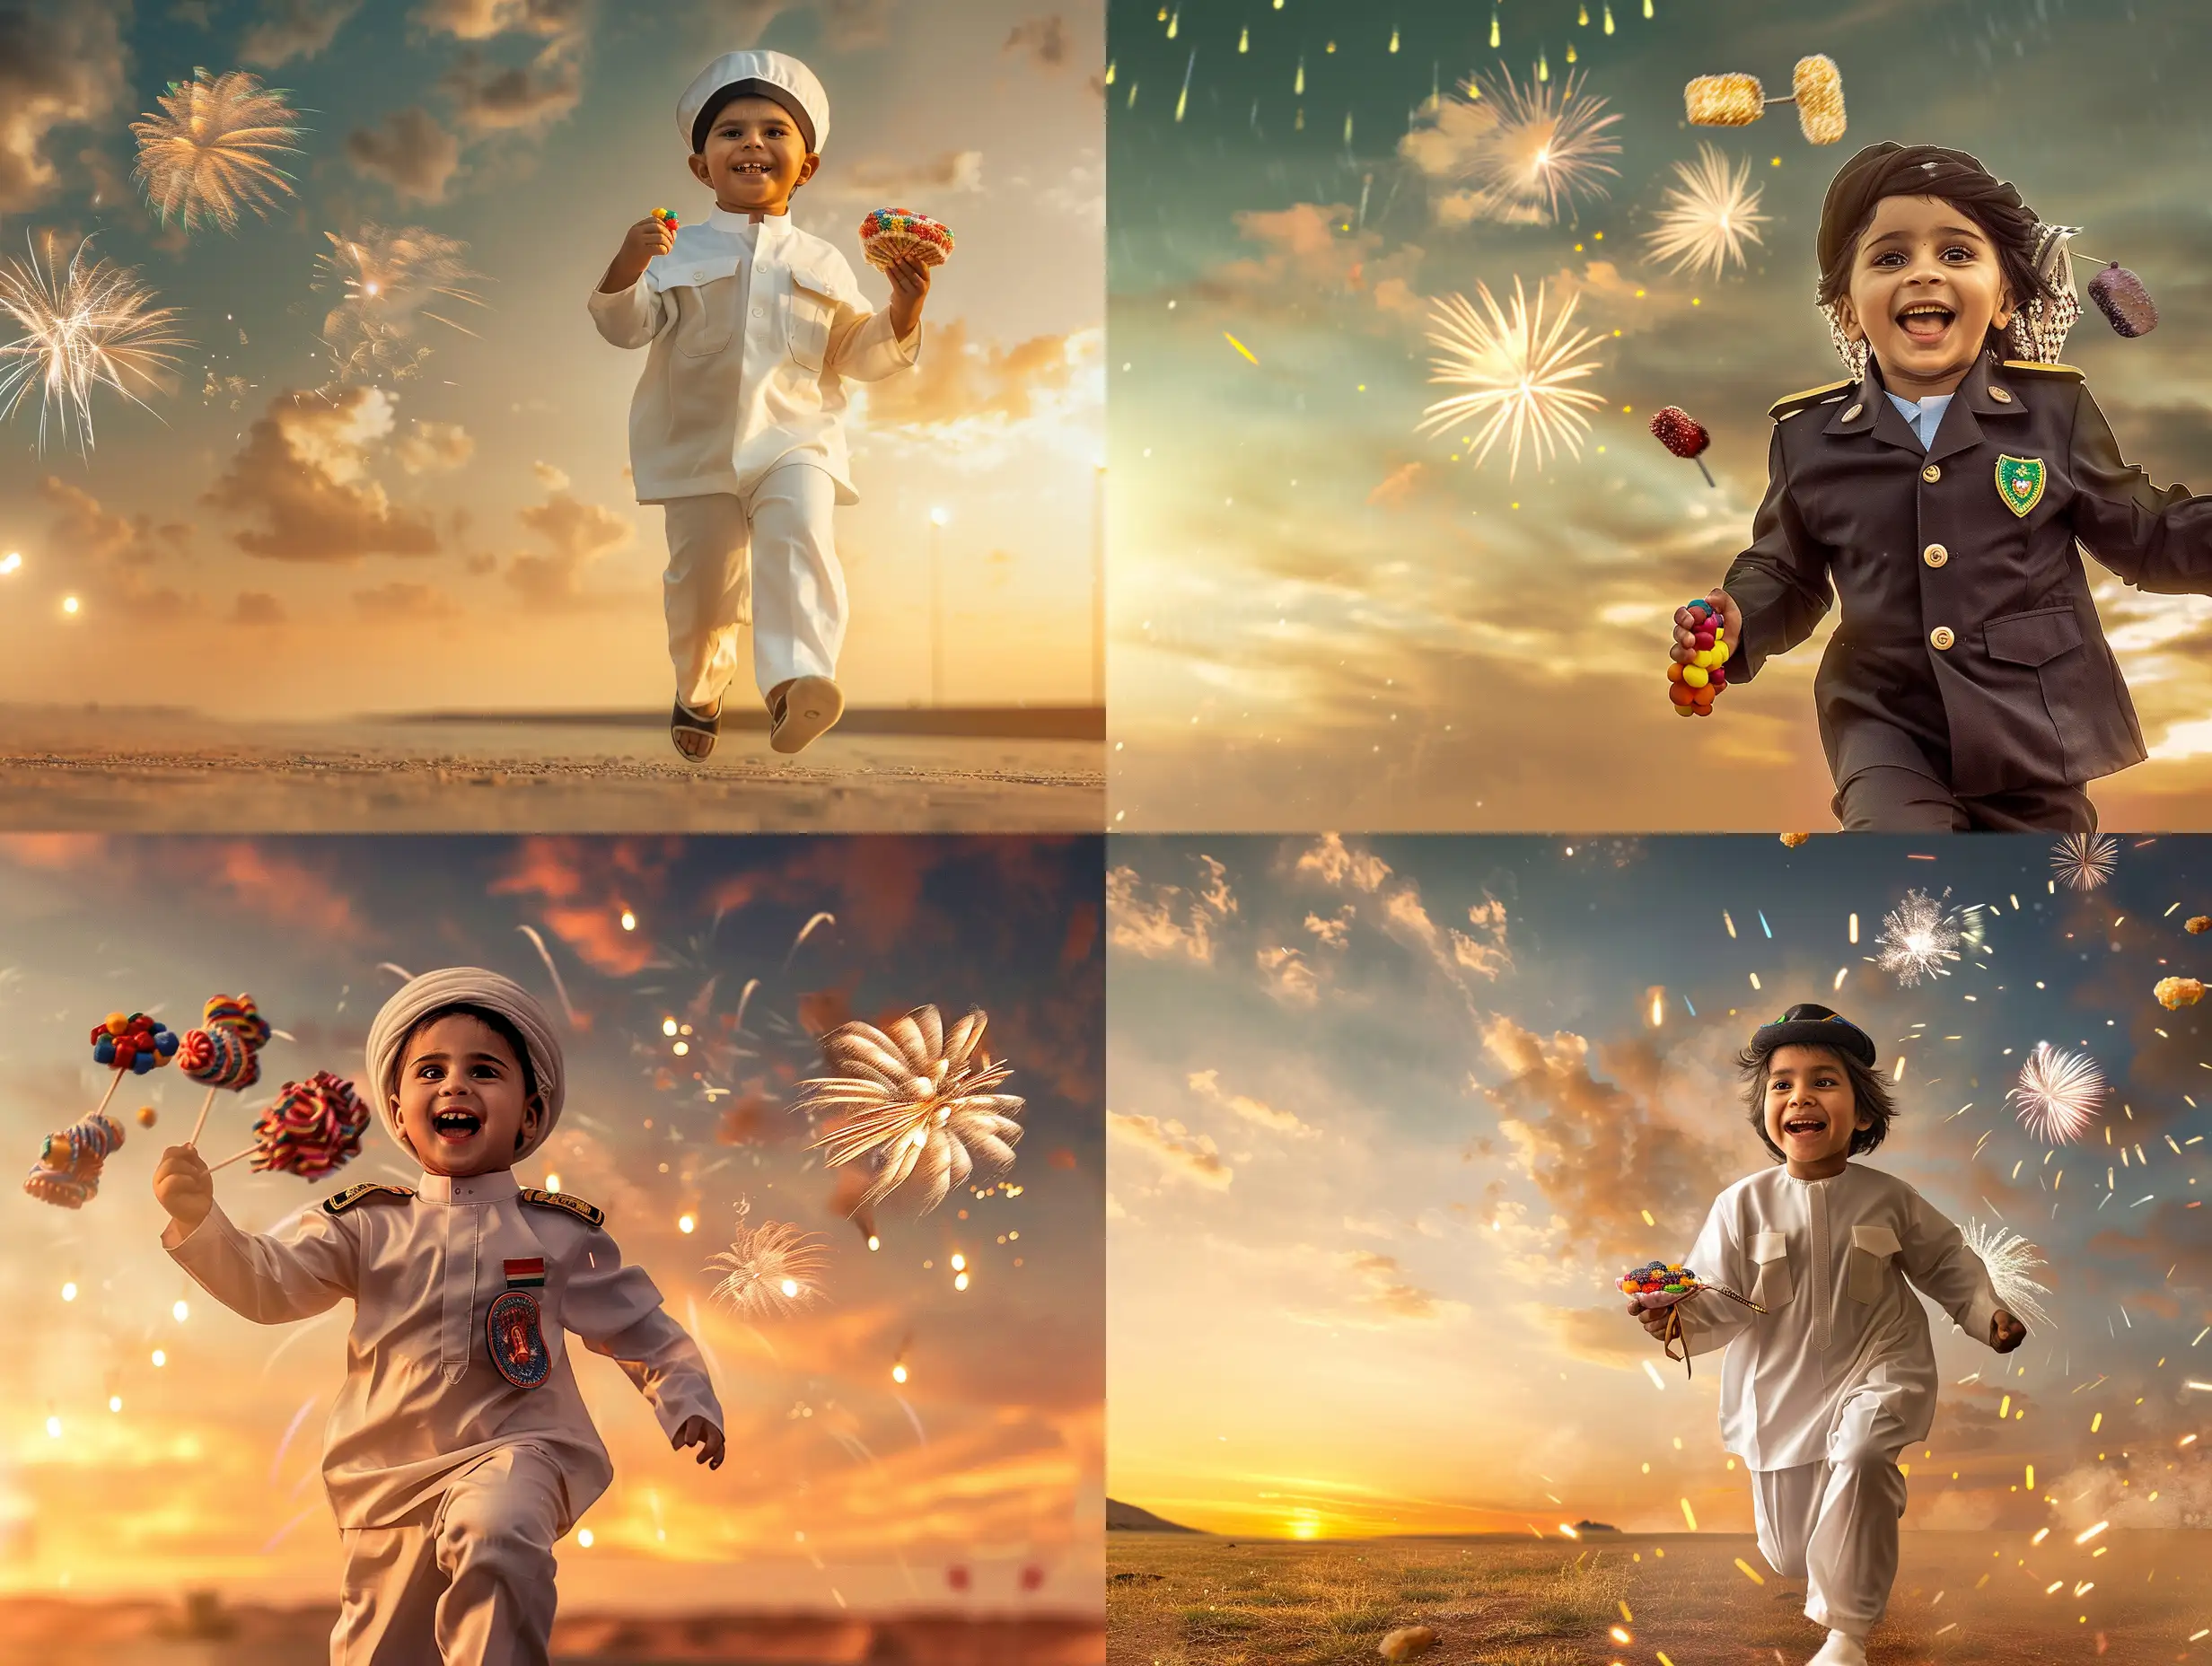 Joyful-Saudi-Child-with-Sweets-and-Fireworks-Portrait-Photography-in-Warm-Tones